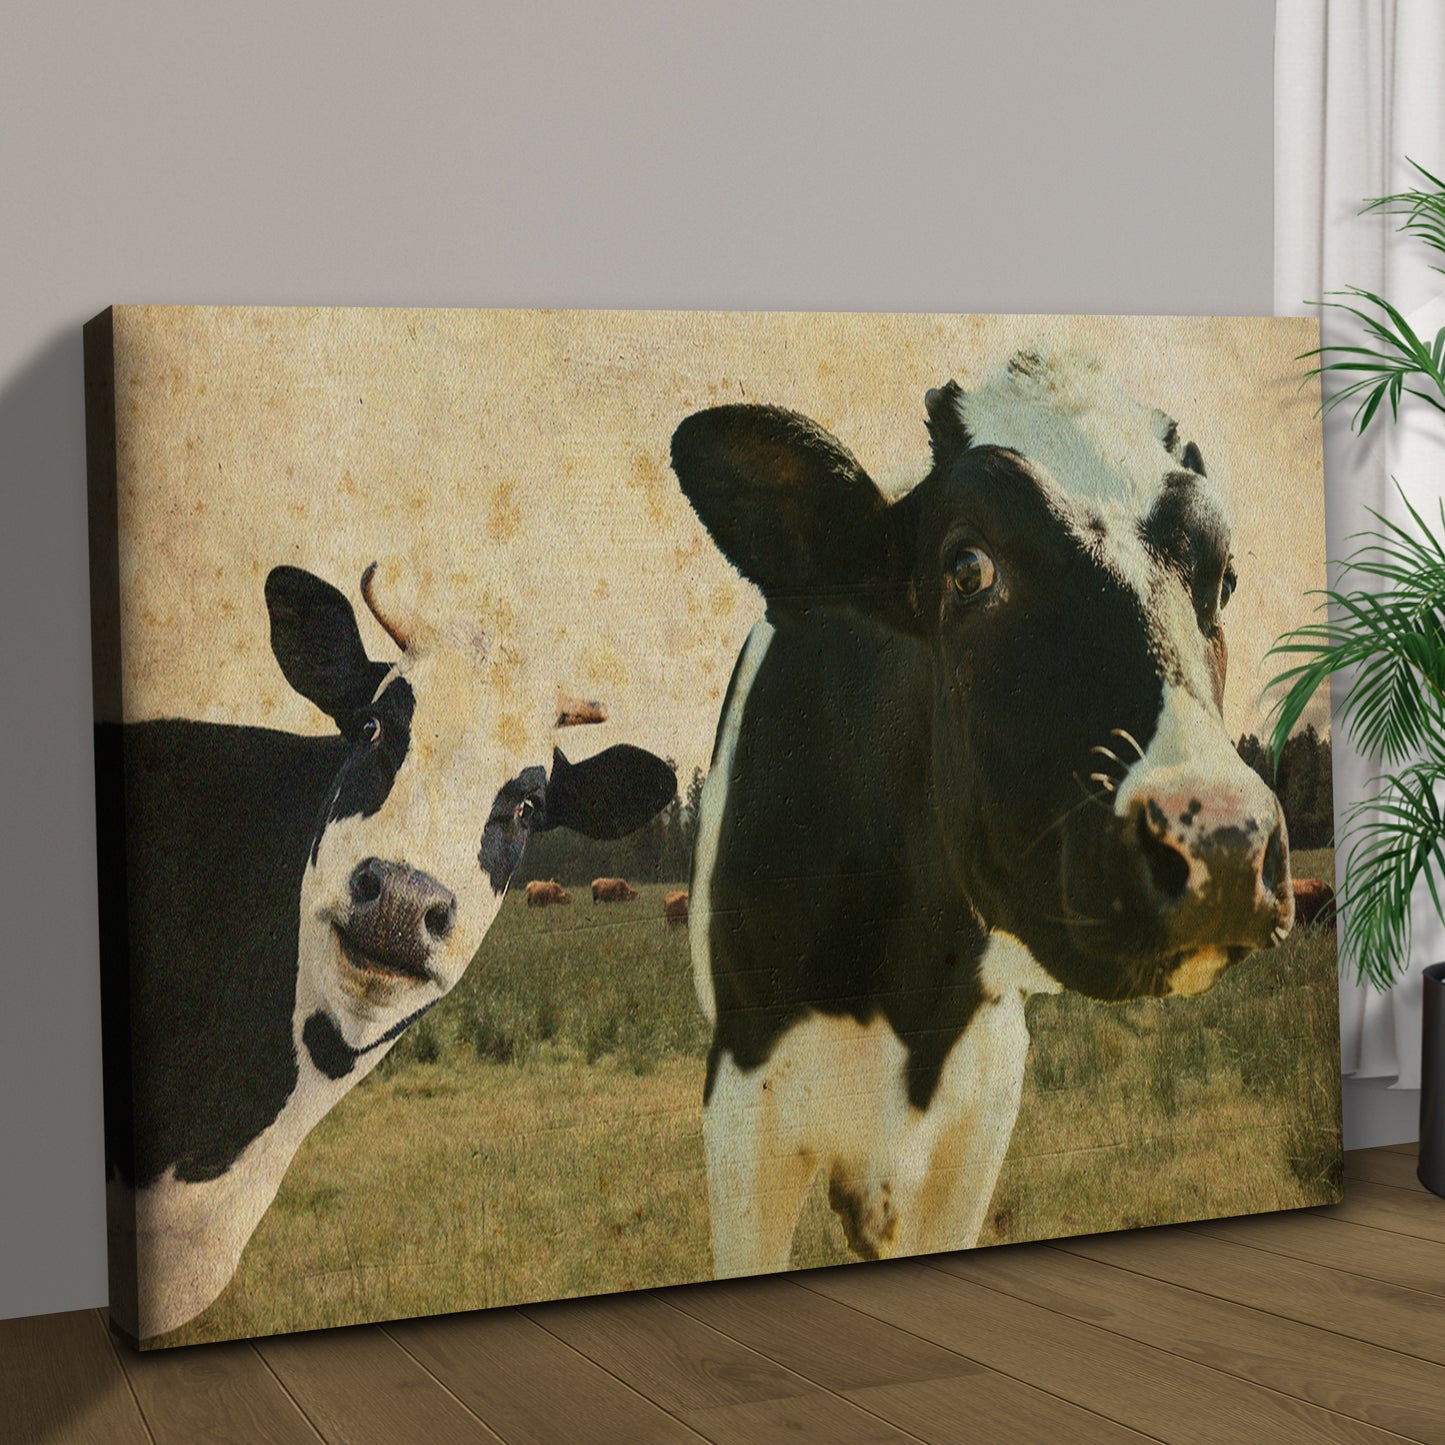 Rustic Curious Cows Canvas Wall Art Style 1 - Image by Tailored Canvases